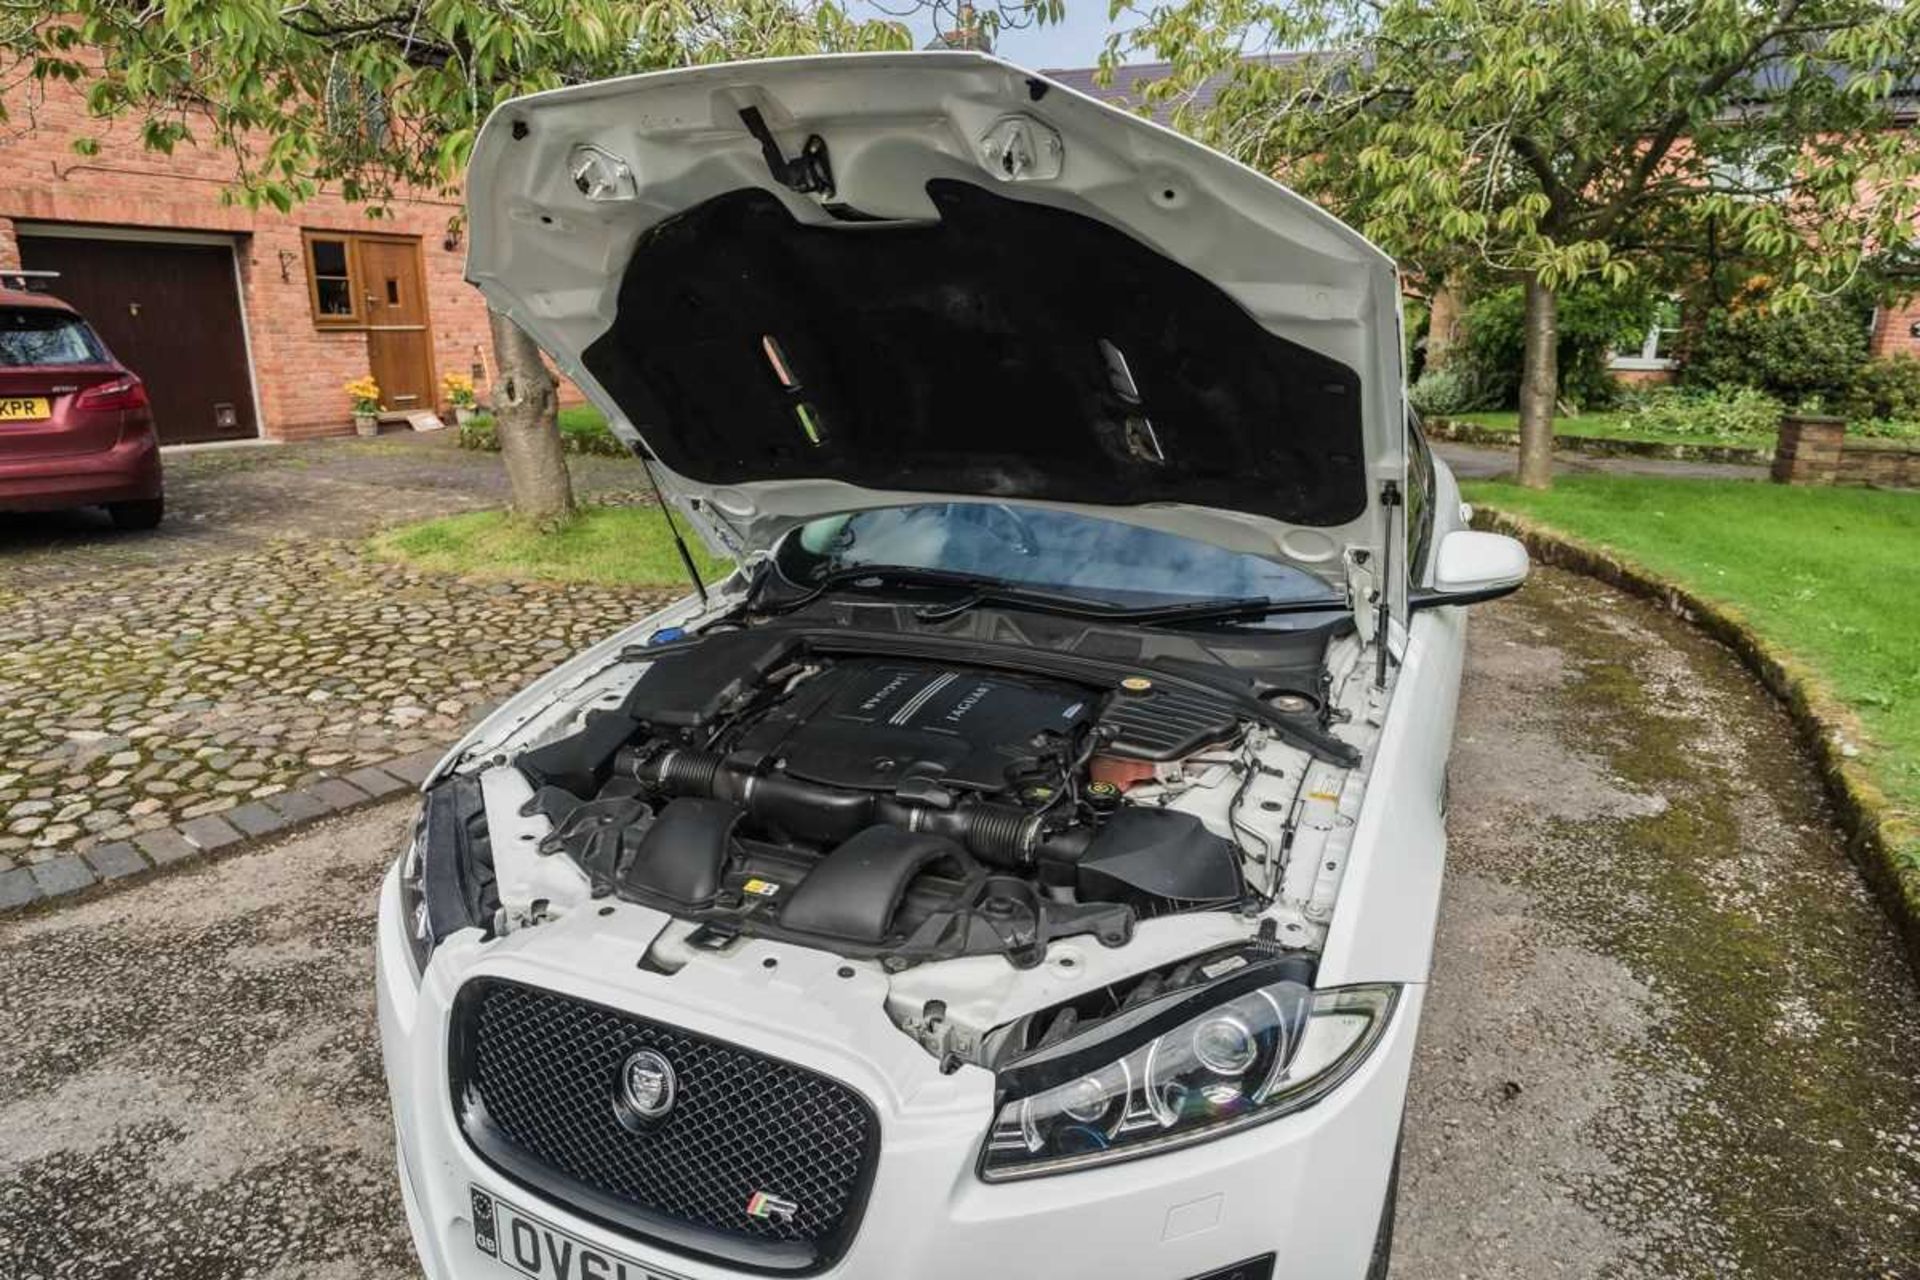 2011 Jaguar XFR Saloon 500 horsepower four-door super saloon, with an enviable factory specification - Image 79 of 83